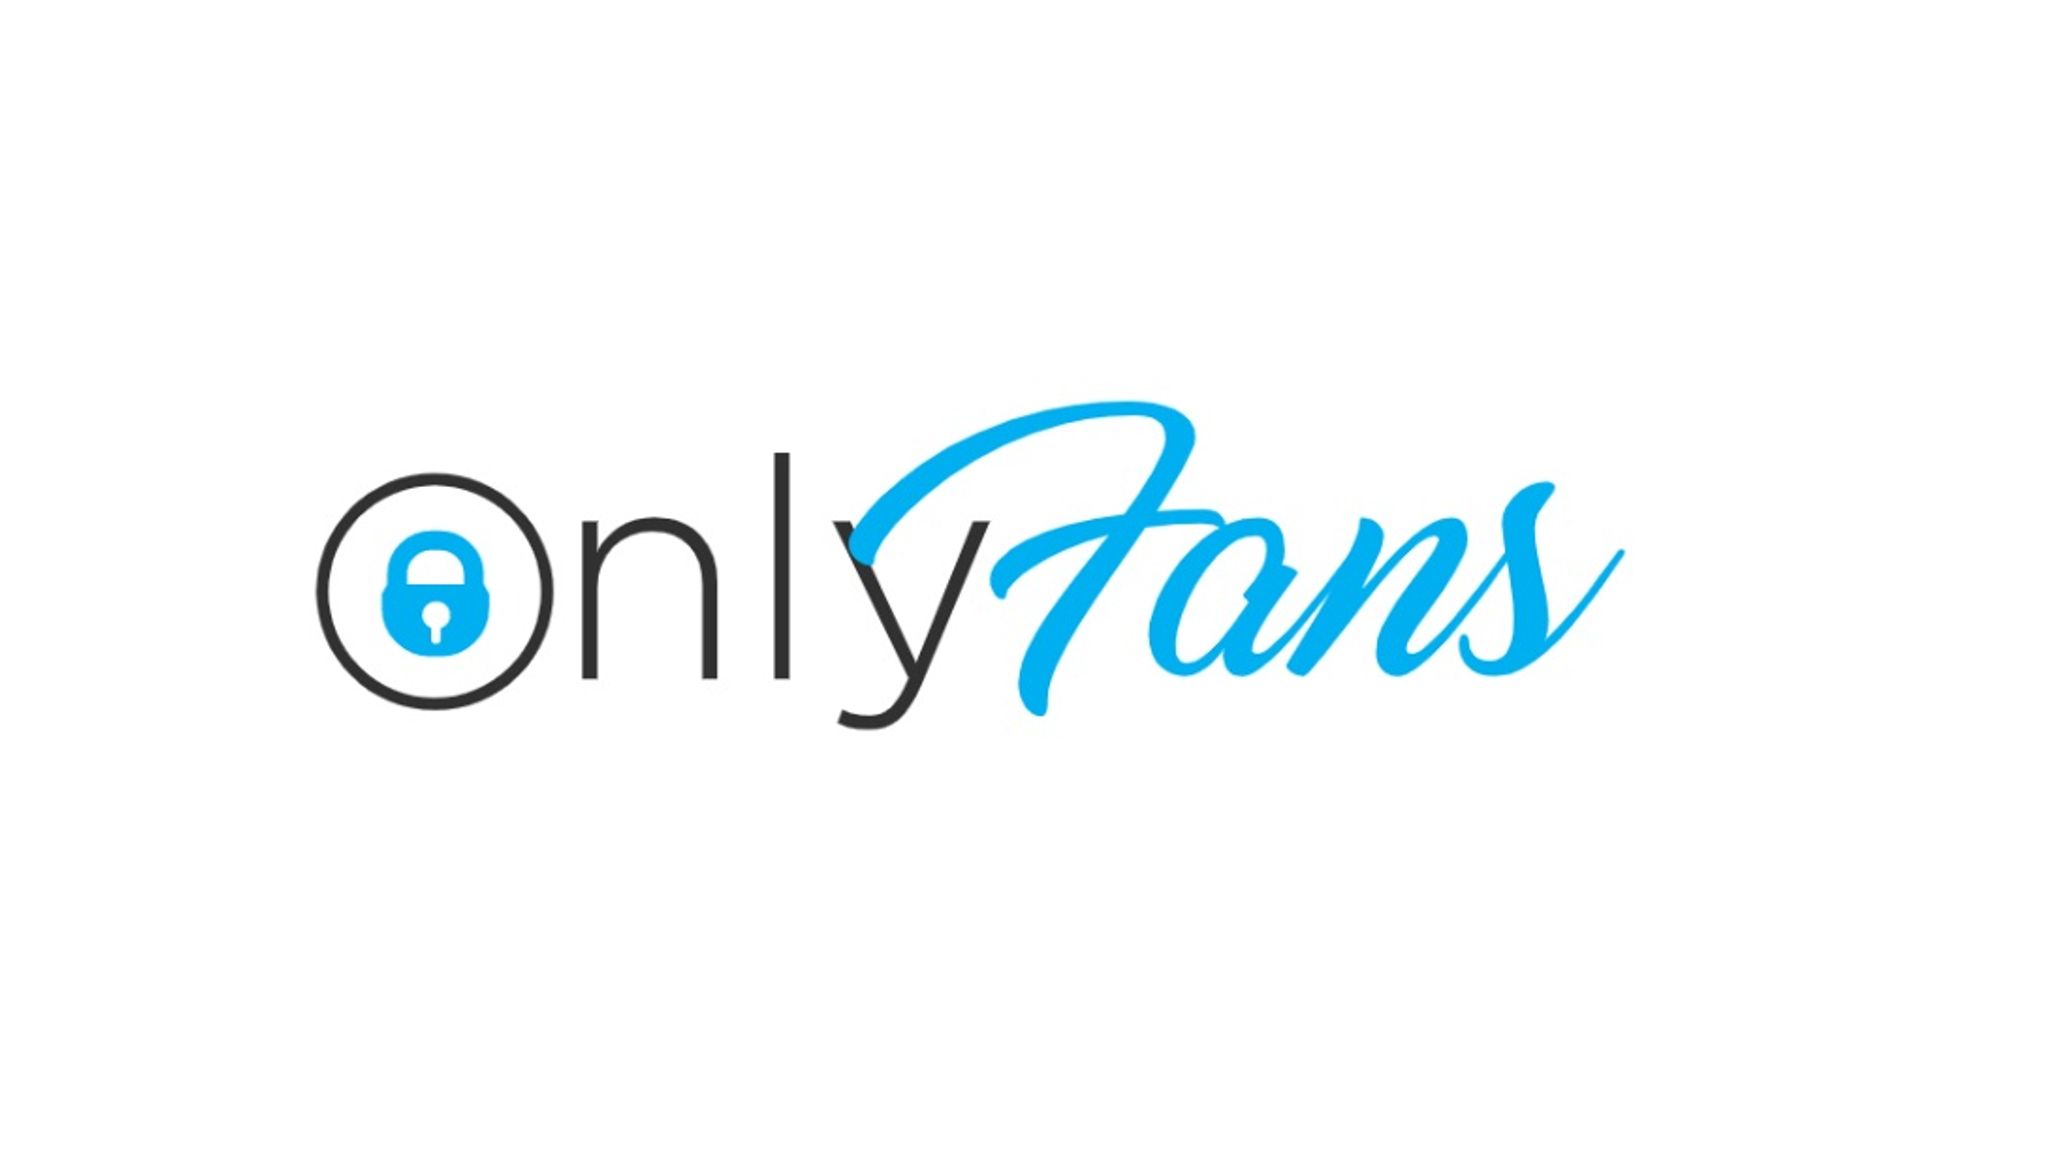 Ct only fans